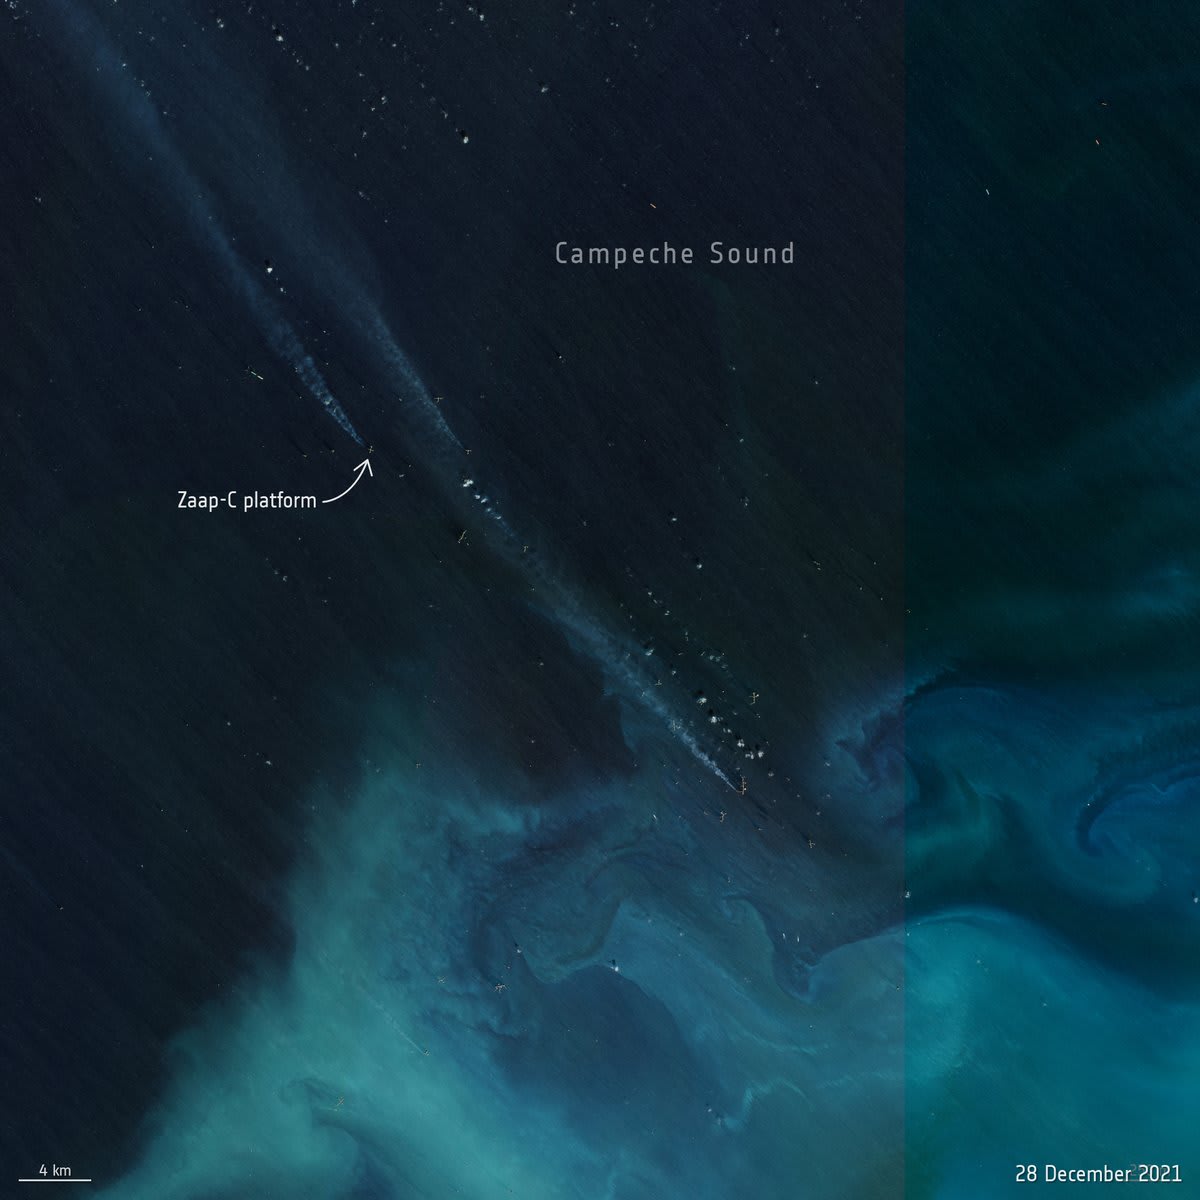 A team of scientists used satellite data to detect MethaneEmissions over offshore platform in the Gulf of Mexico 🛰️ This is the first time that individual methane plumes from offshore platforms are mapped from space. Details from @ESA_EO 👉